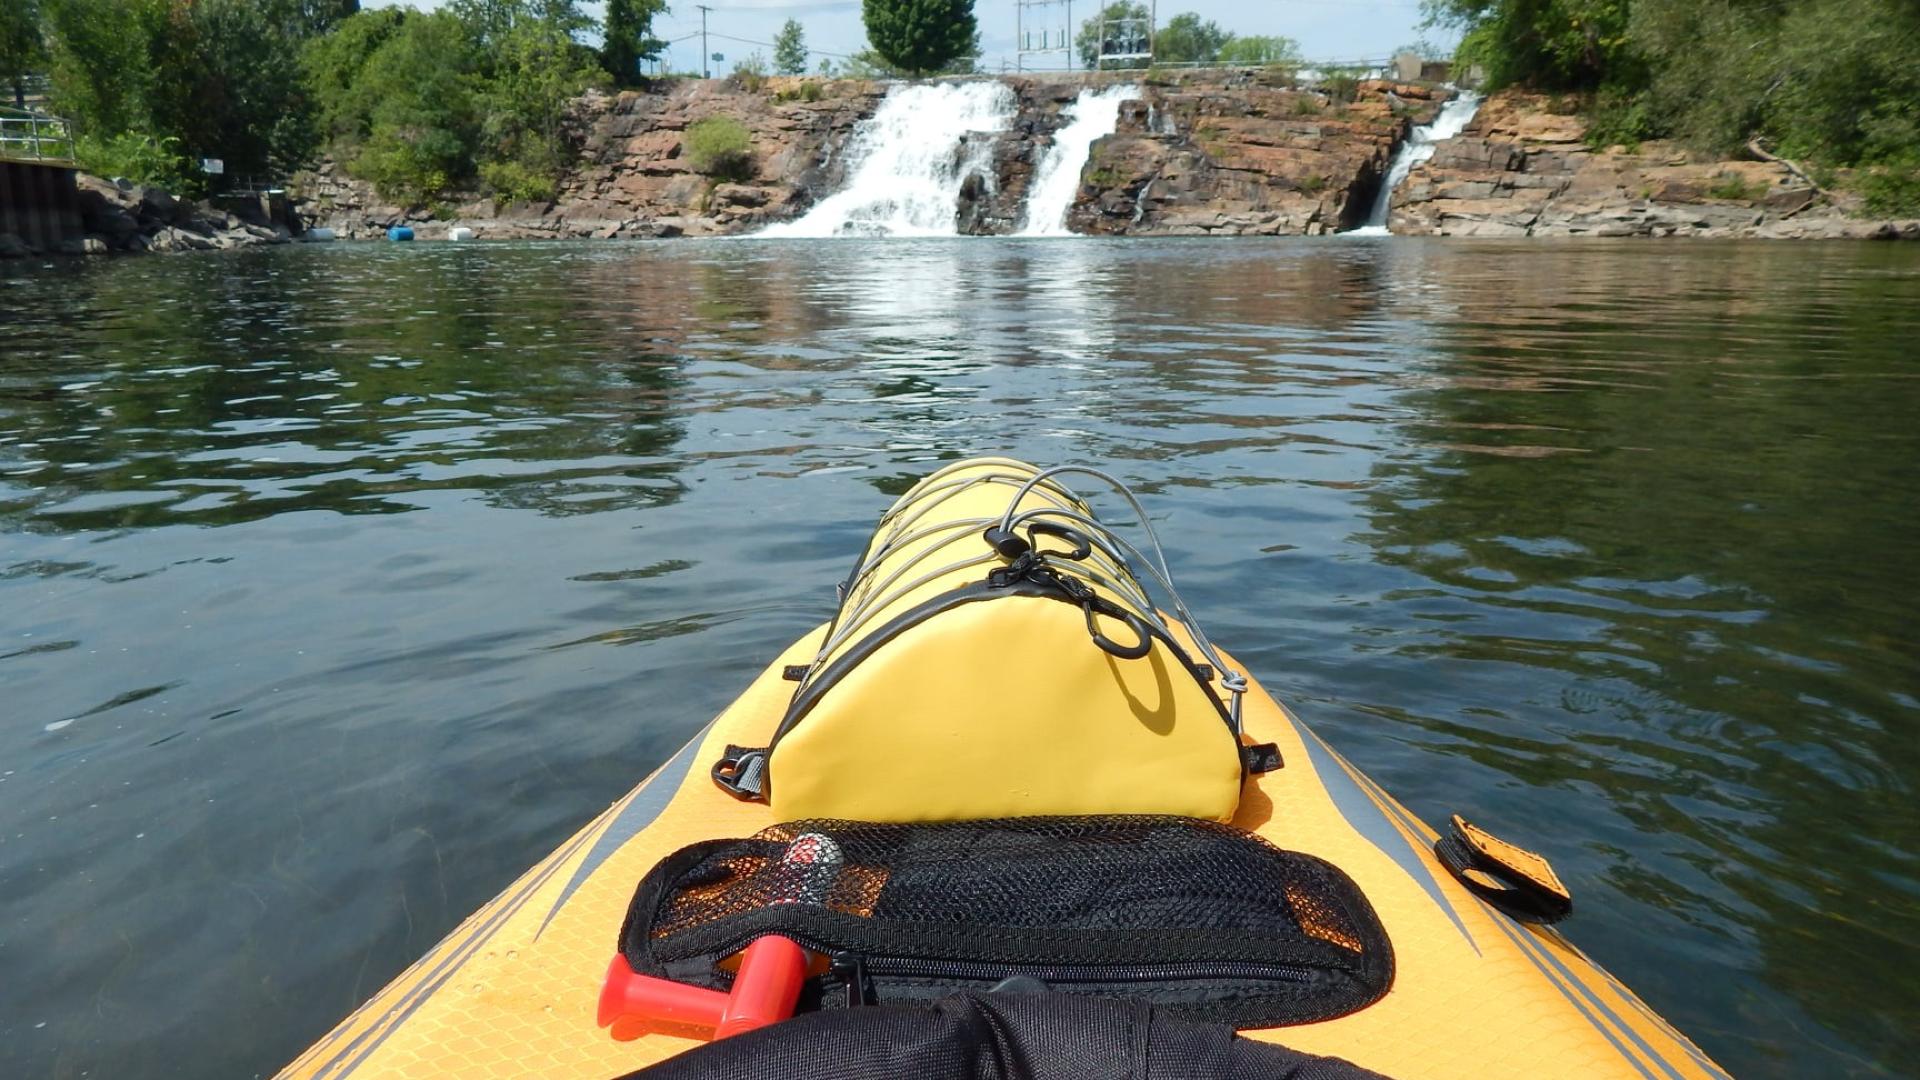 Adventures in Kayaking the LaChute River